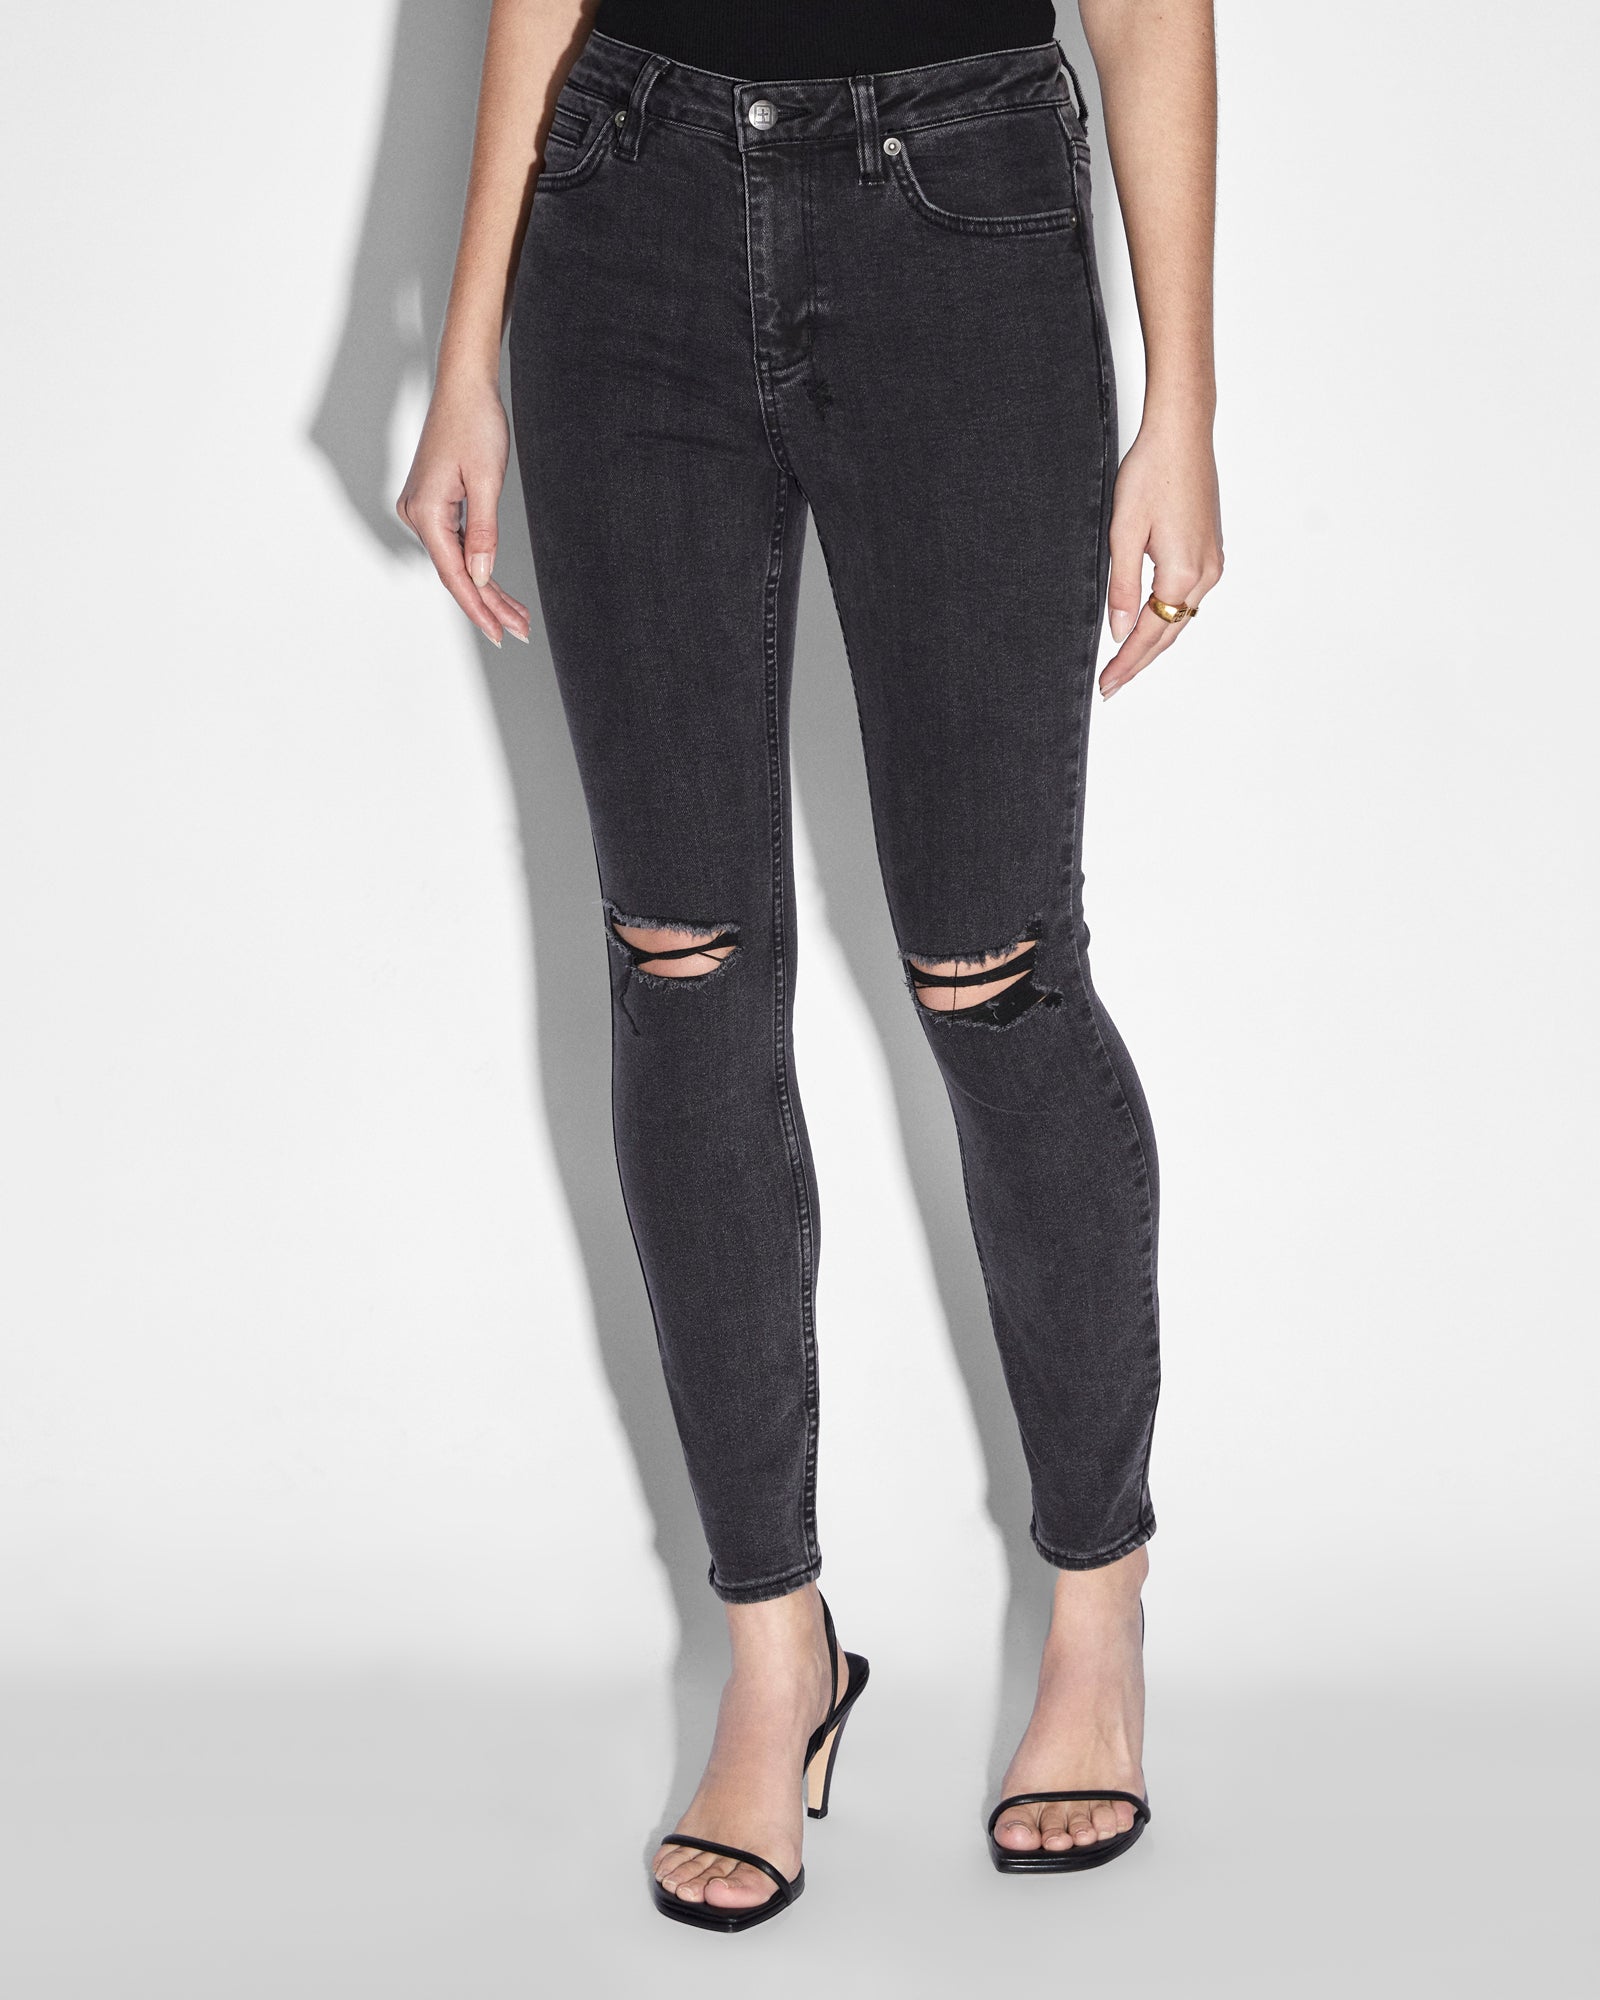 Black Jeans for Girls: Girls Black Ripped Jeans & More